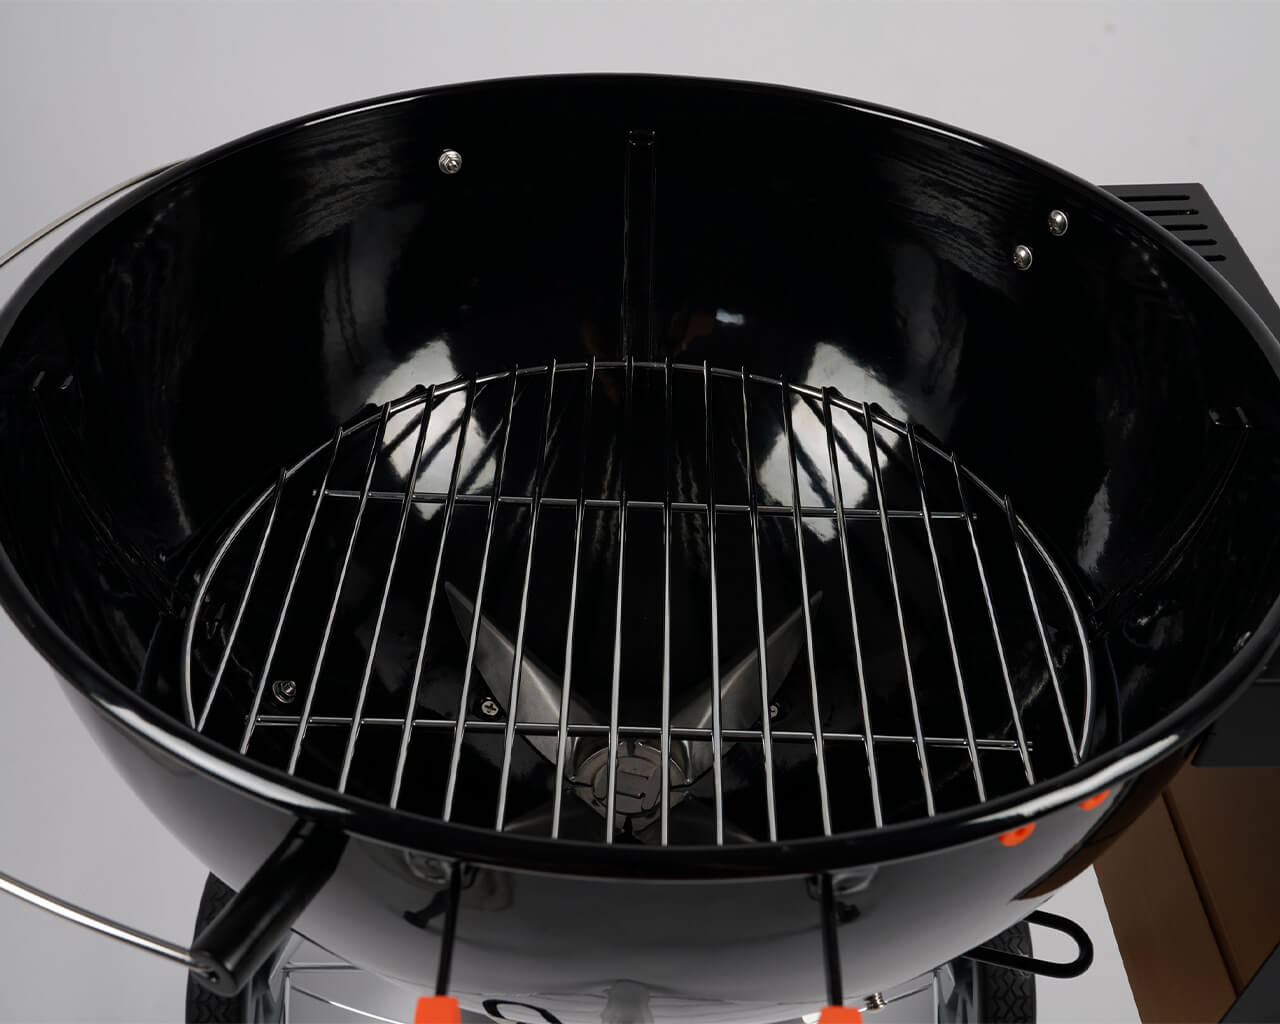 ProQ Rodeo Charcoal Kettle BBQ - 57cm, , hi-res image number null